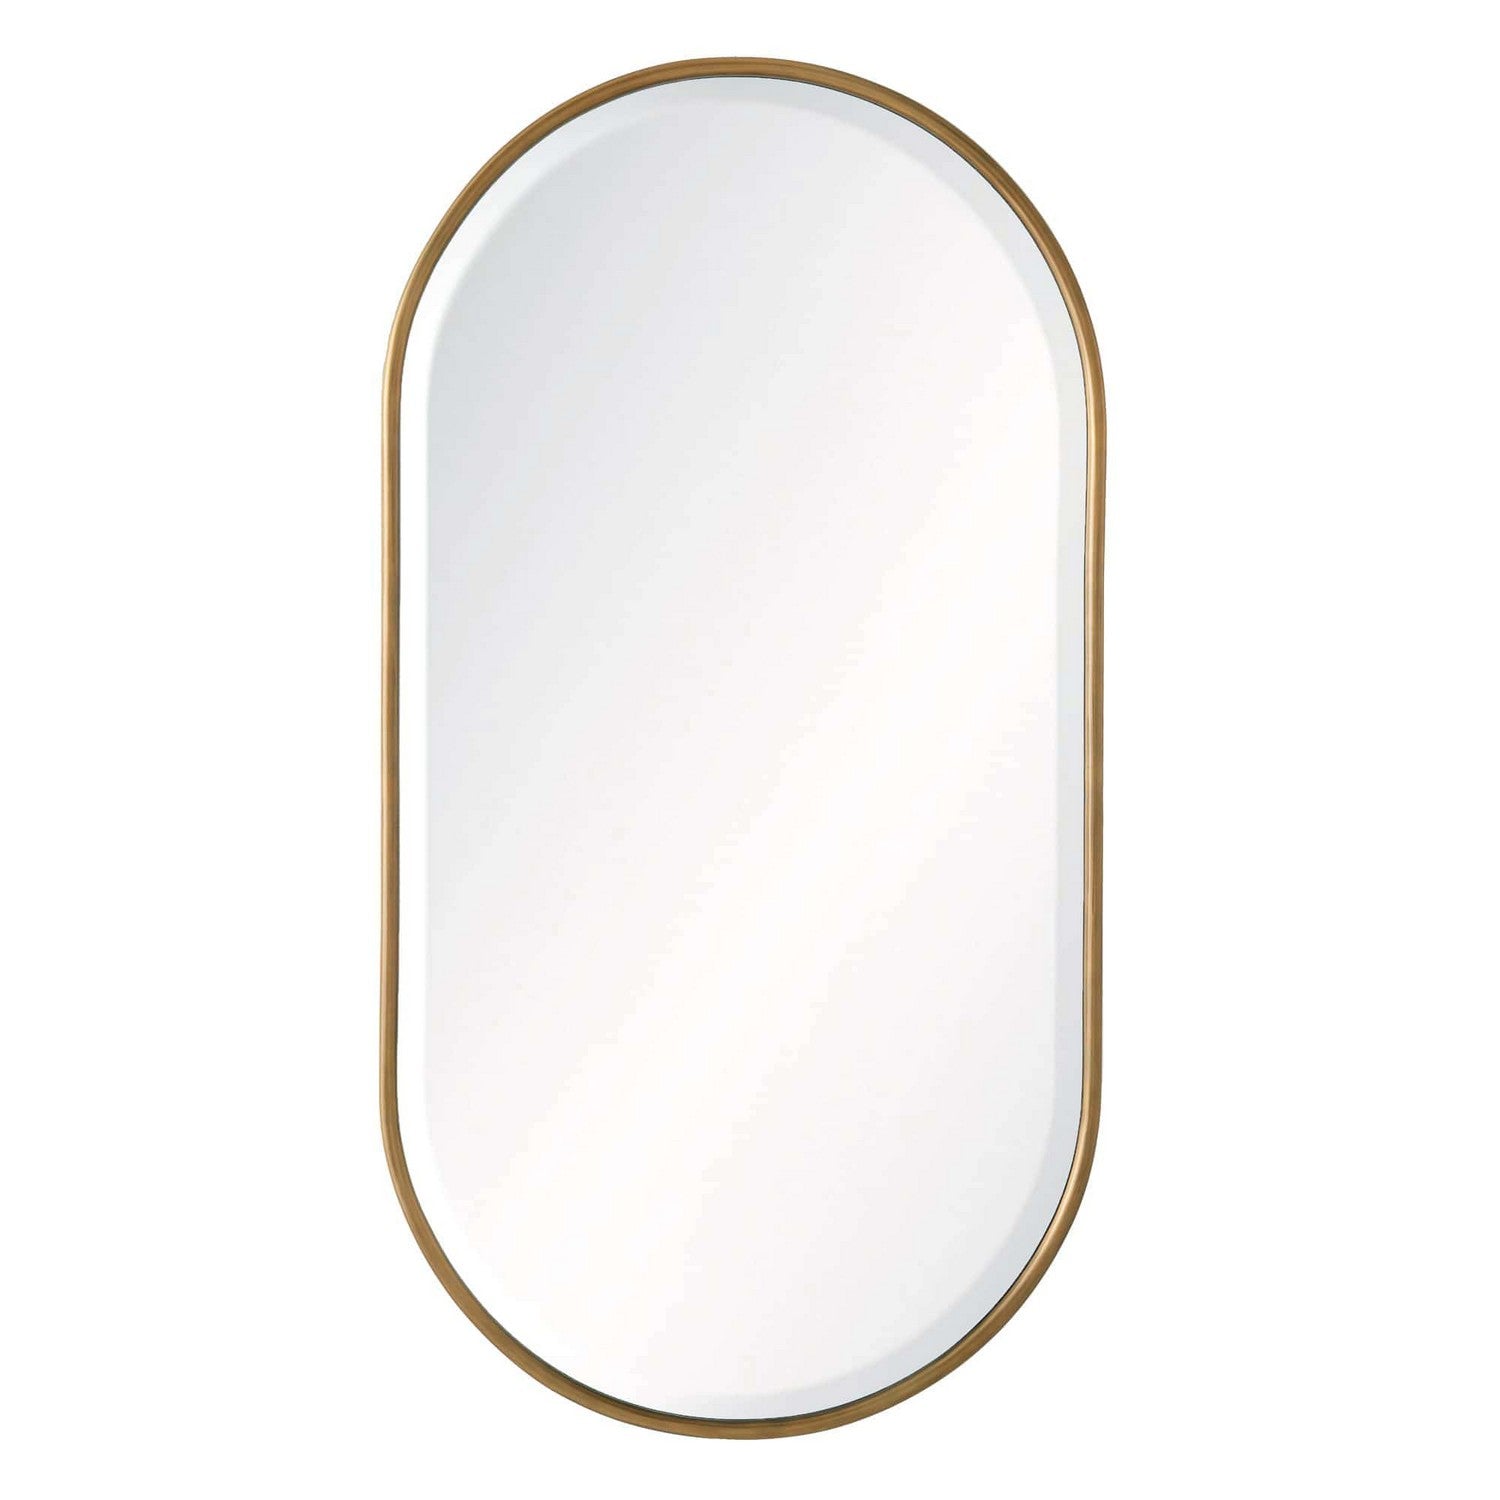 Mirror from the Vaquero collection in Antique Brass finish